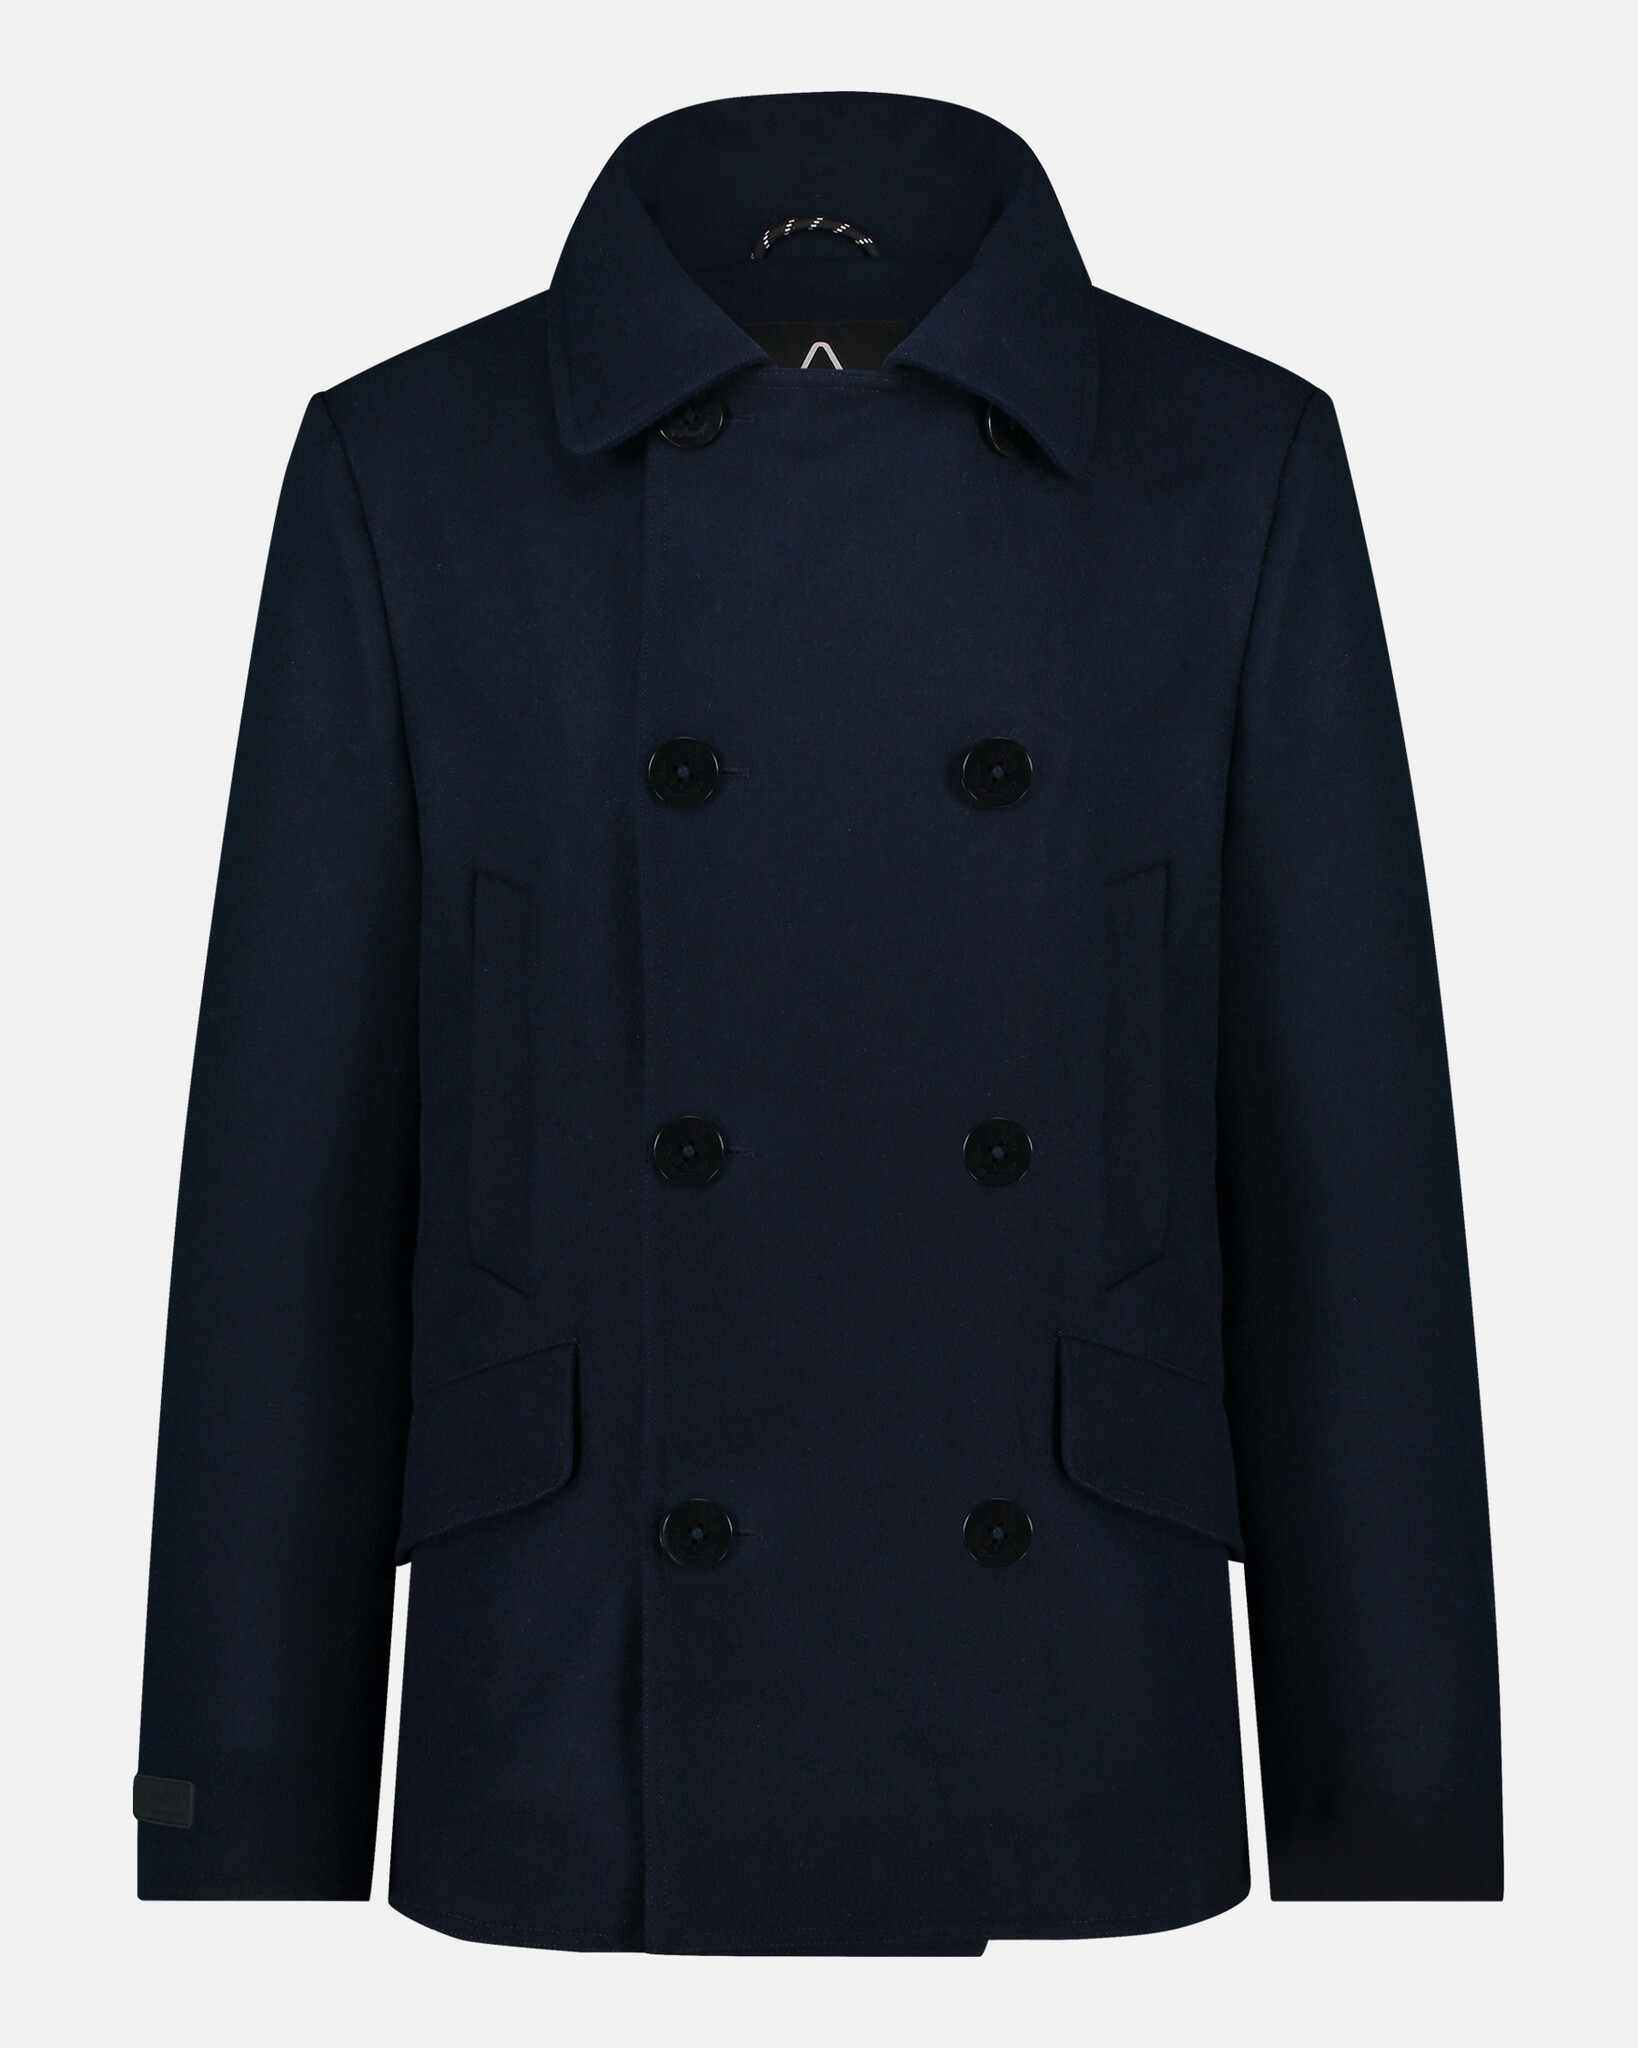 Classic Melton wool double-breasted Peacoat